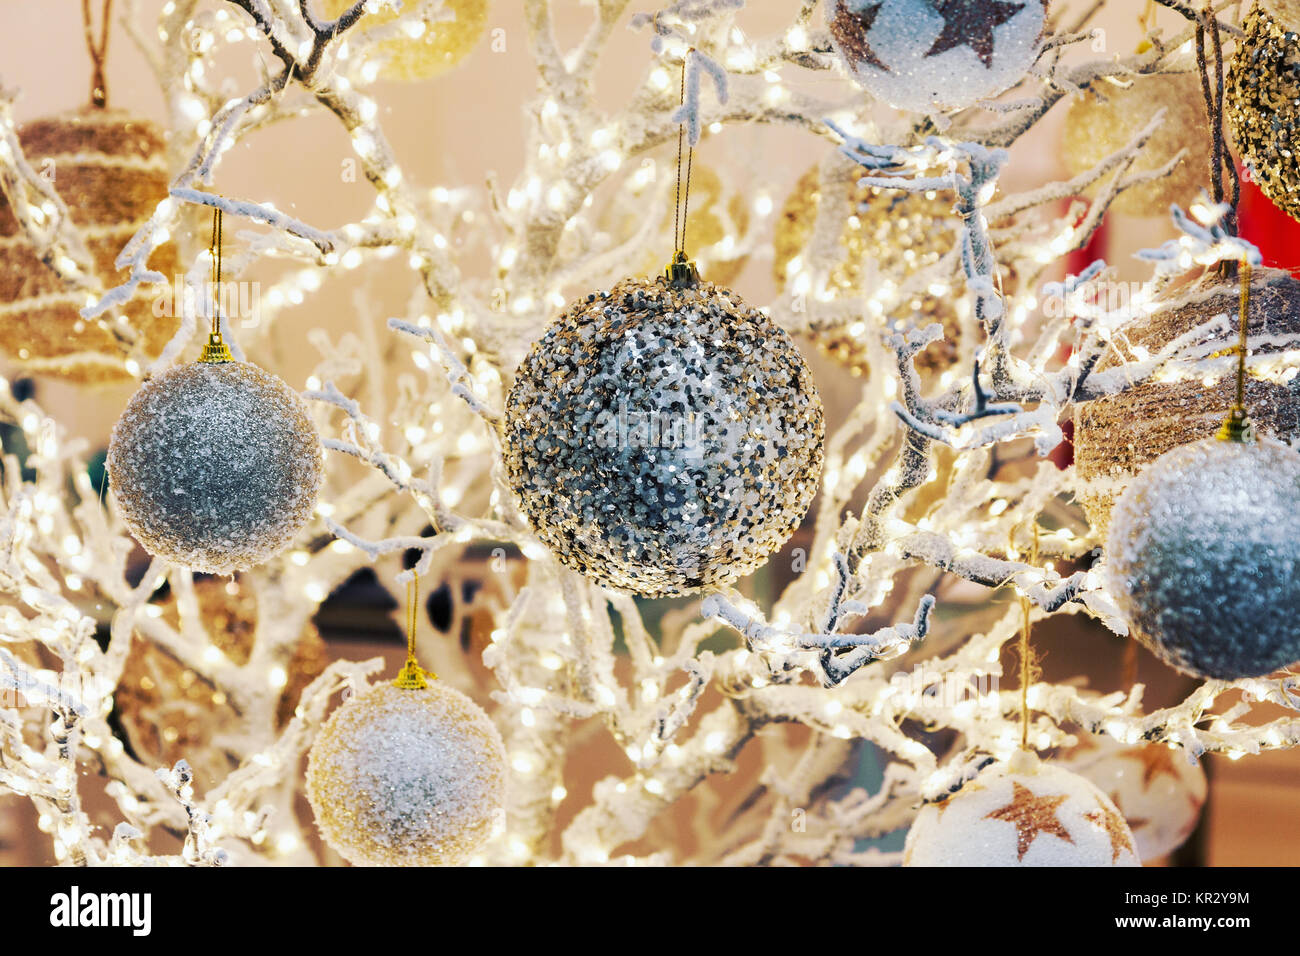 Festive Christmas holiday background with glittering decorations, Christmas balls and lamps Stock Photo